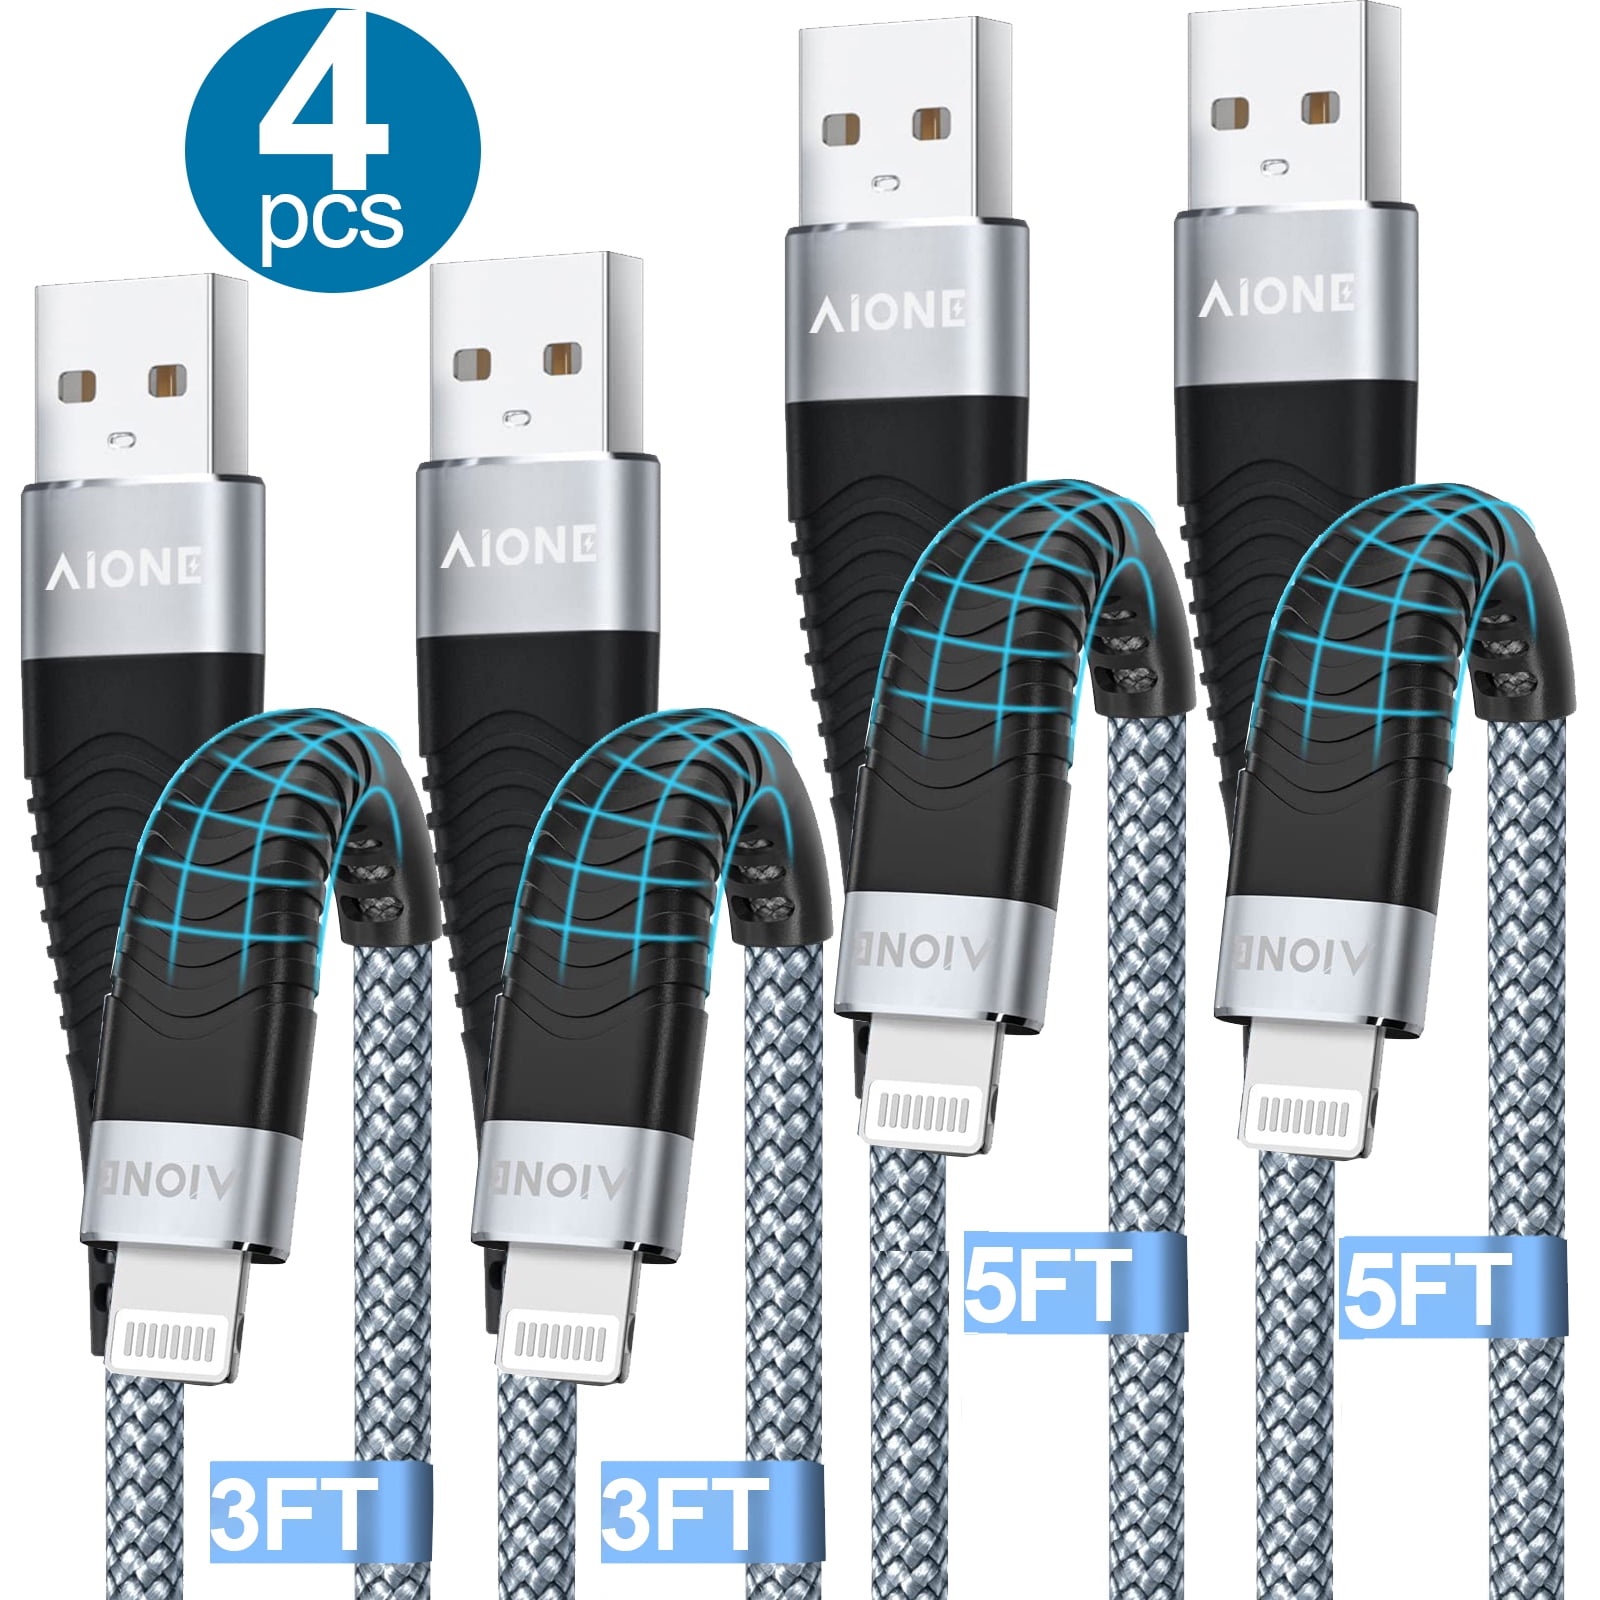 Cable USB Apple Lightning charge rapide iPhone iPad - All4iphone